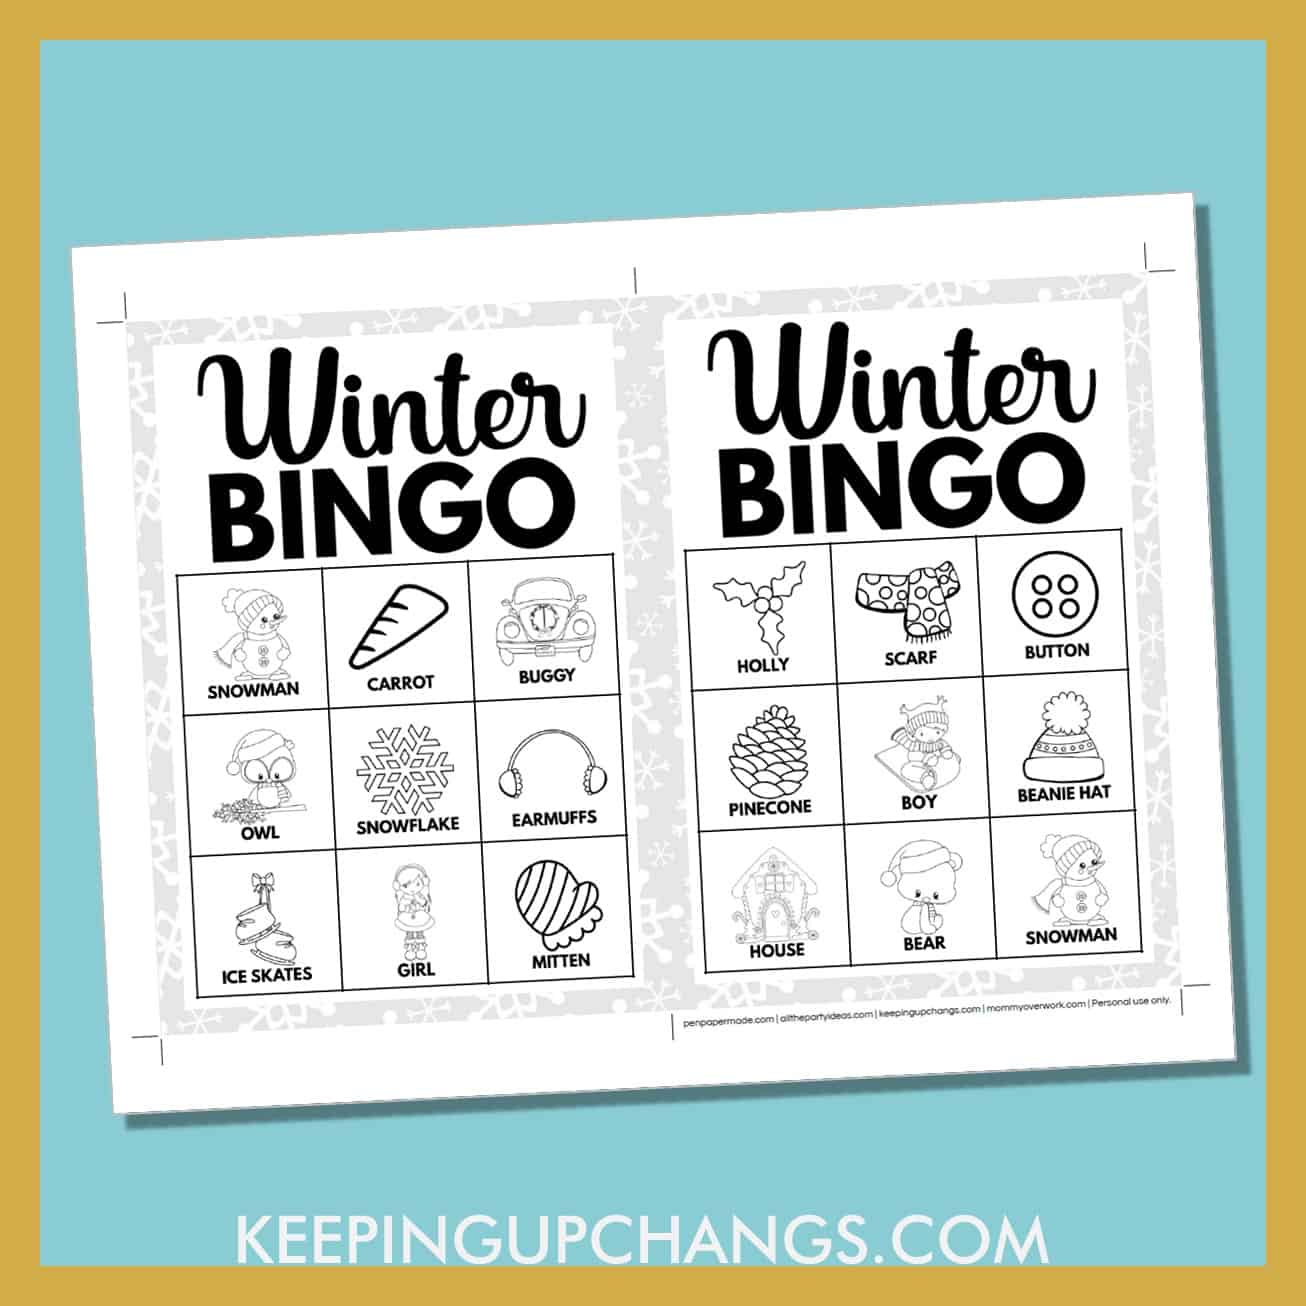 free winter bingo card 3x3 5x7 game boards with black, white images and text words.